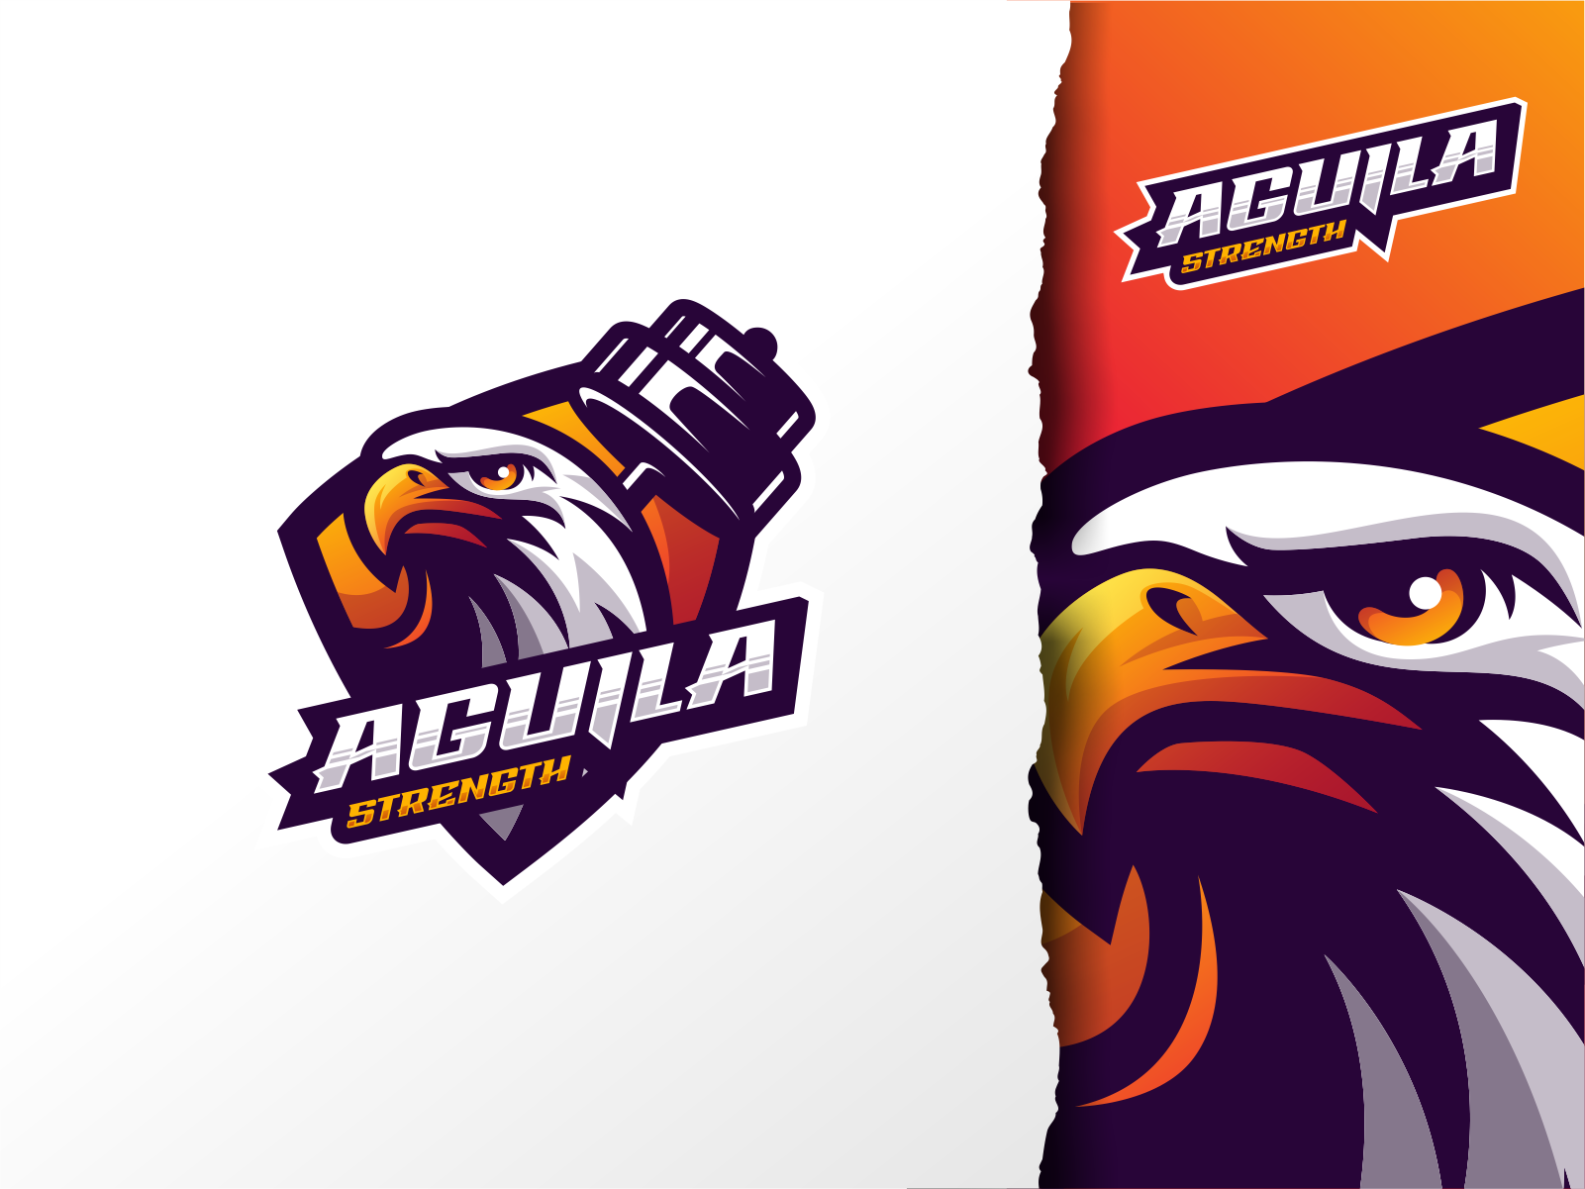 Aguila Strength by Modal Tampang on Dribbble